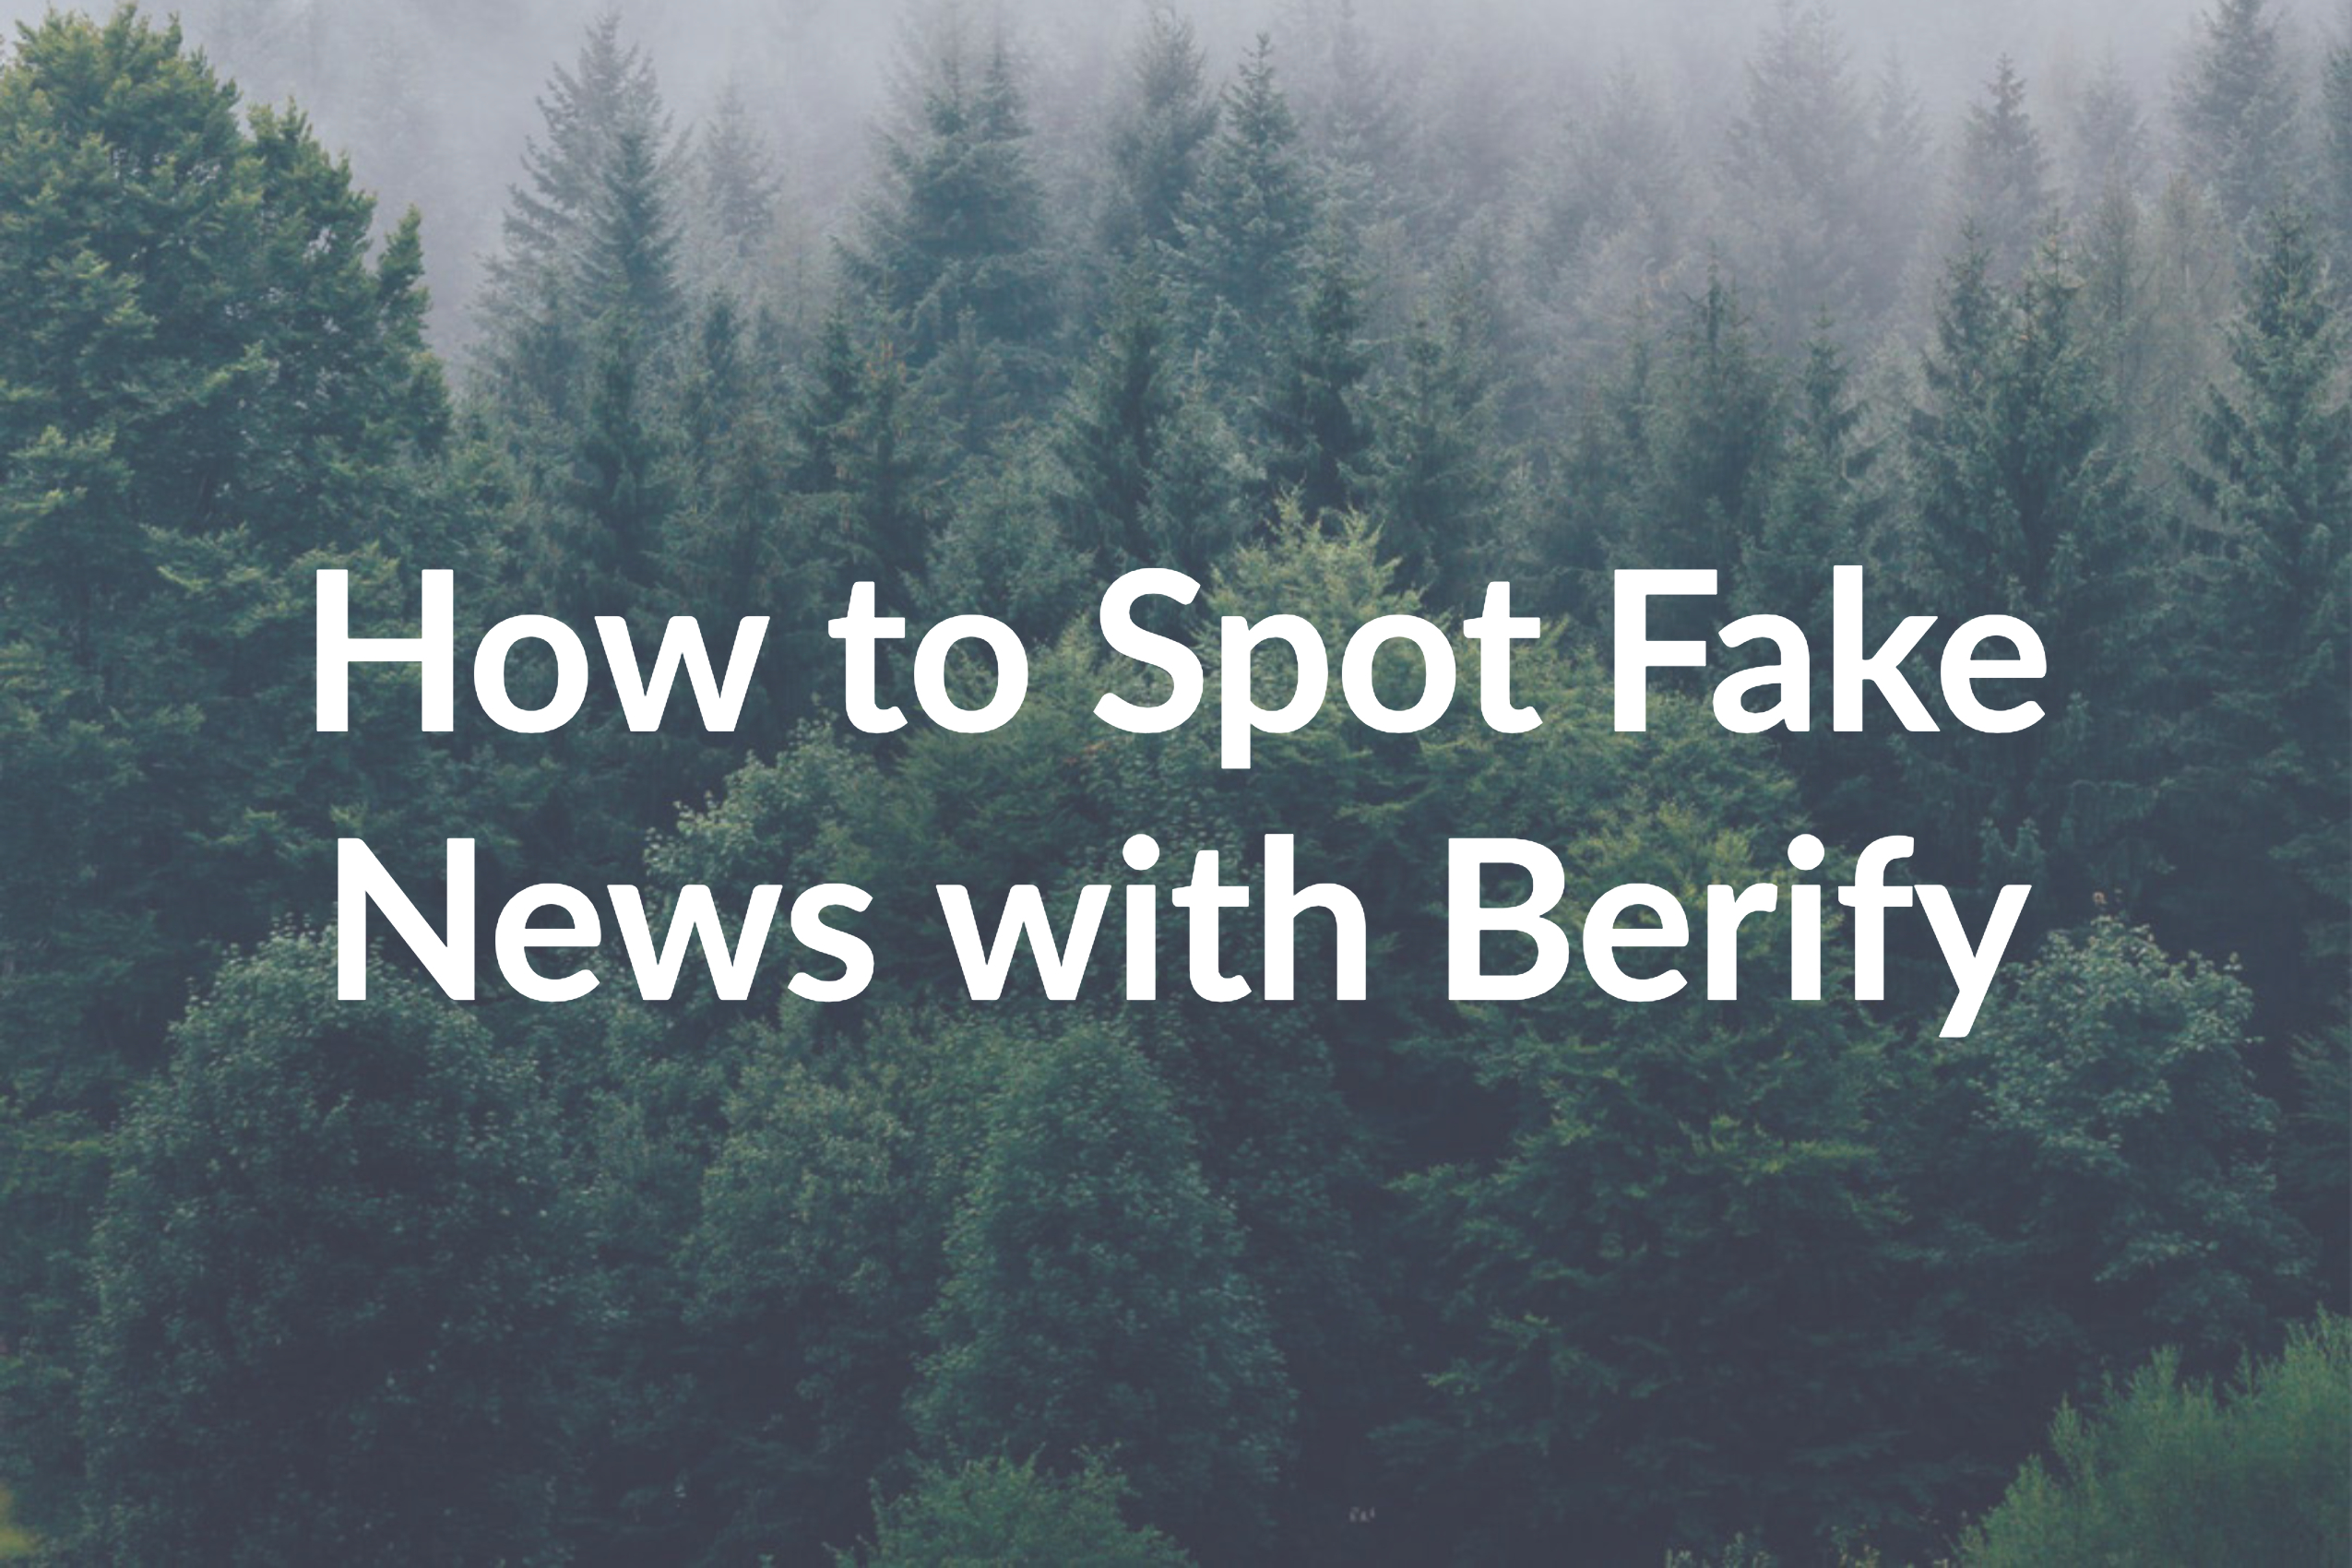 How to Spot Fake News with Berify